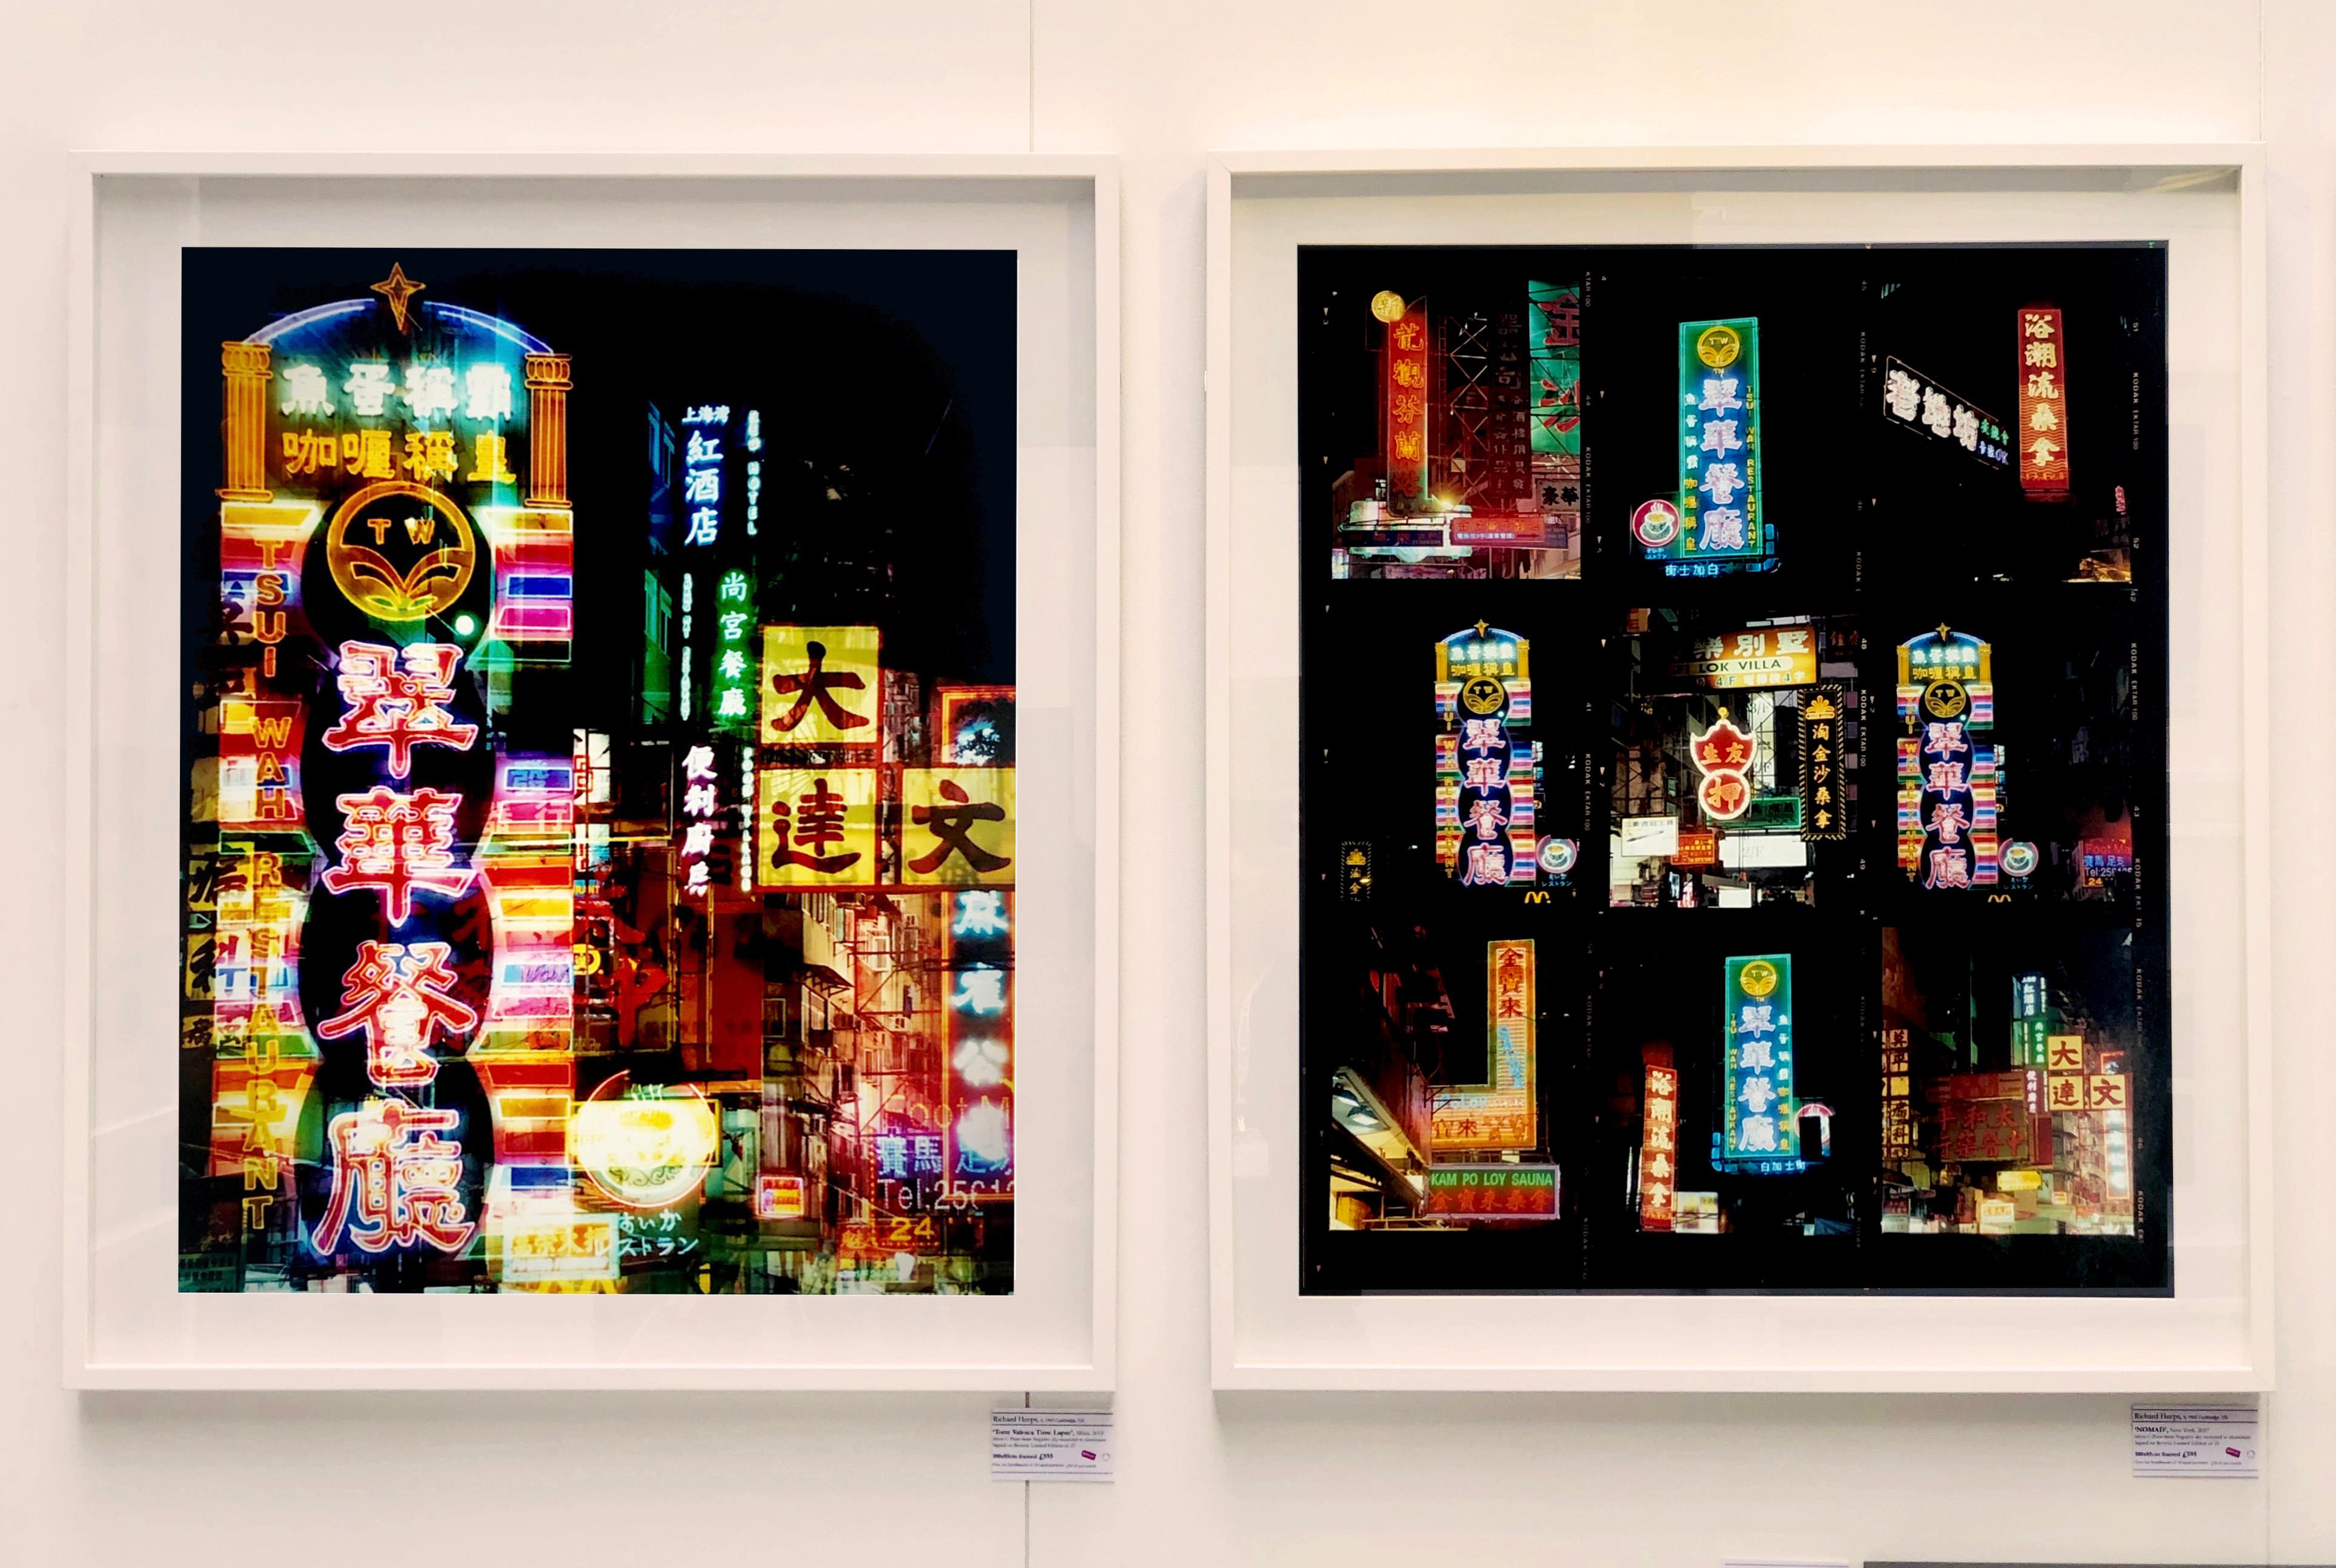 Part of Richard Heeps series The Streets of Hong Kong, shot on negative in 2016 but just executed in his darkroom in March 2019.
'Look Up Mong Kok', captures the spirit of walking the streets in Hong Kong, the overwhelming buzz of the competing neon